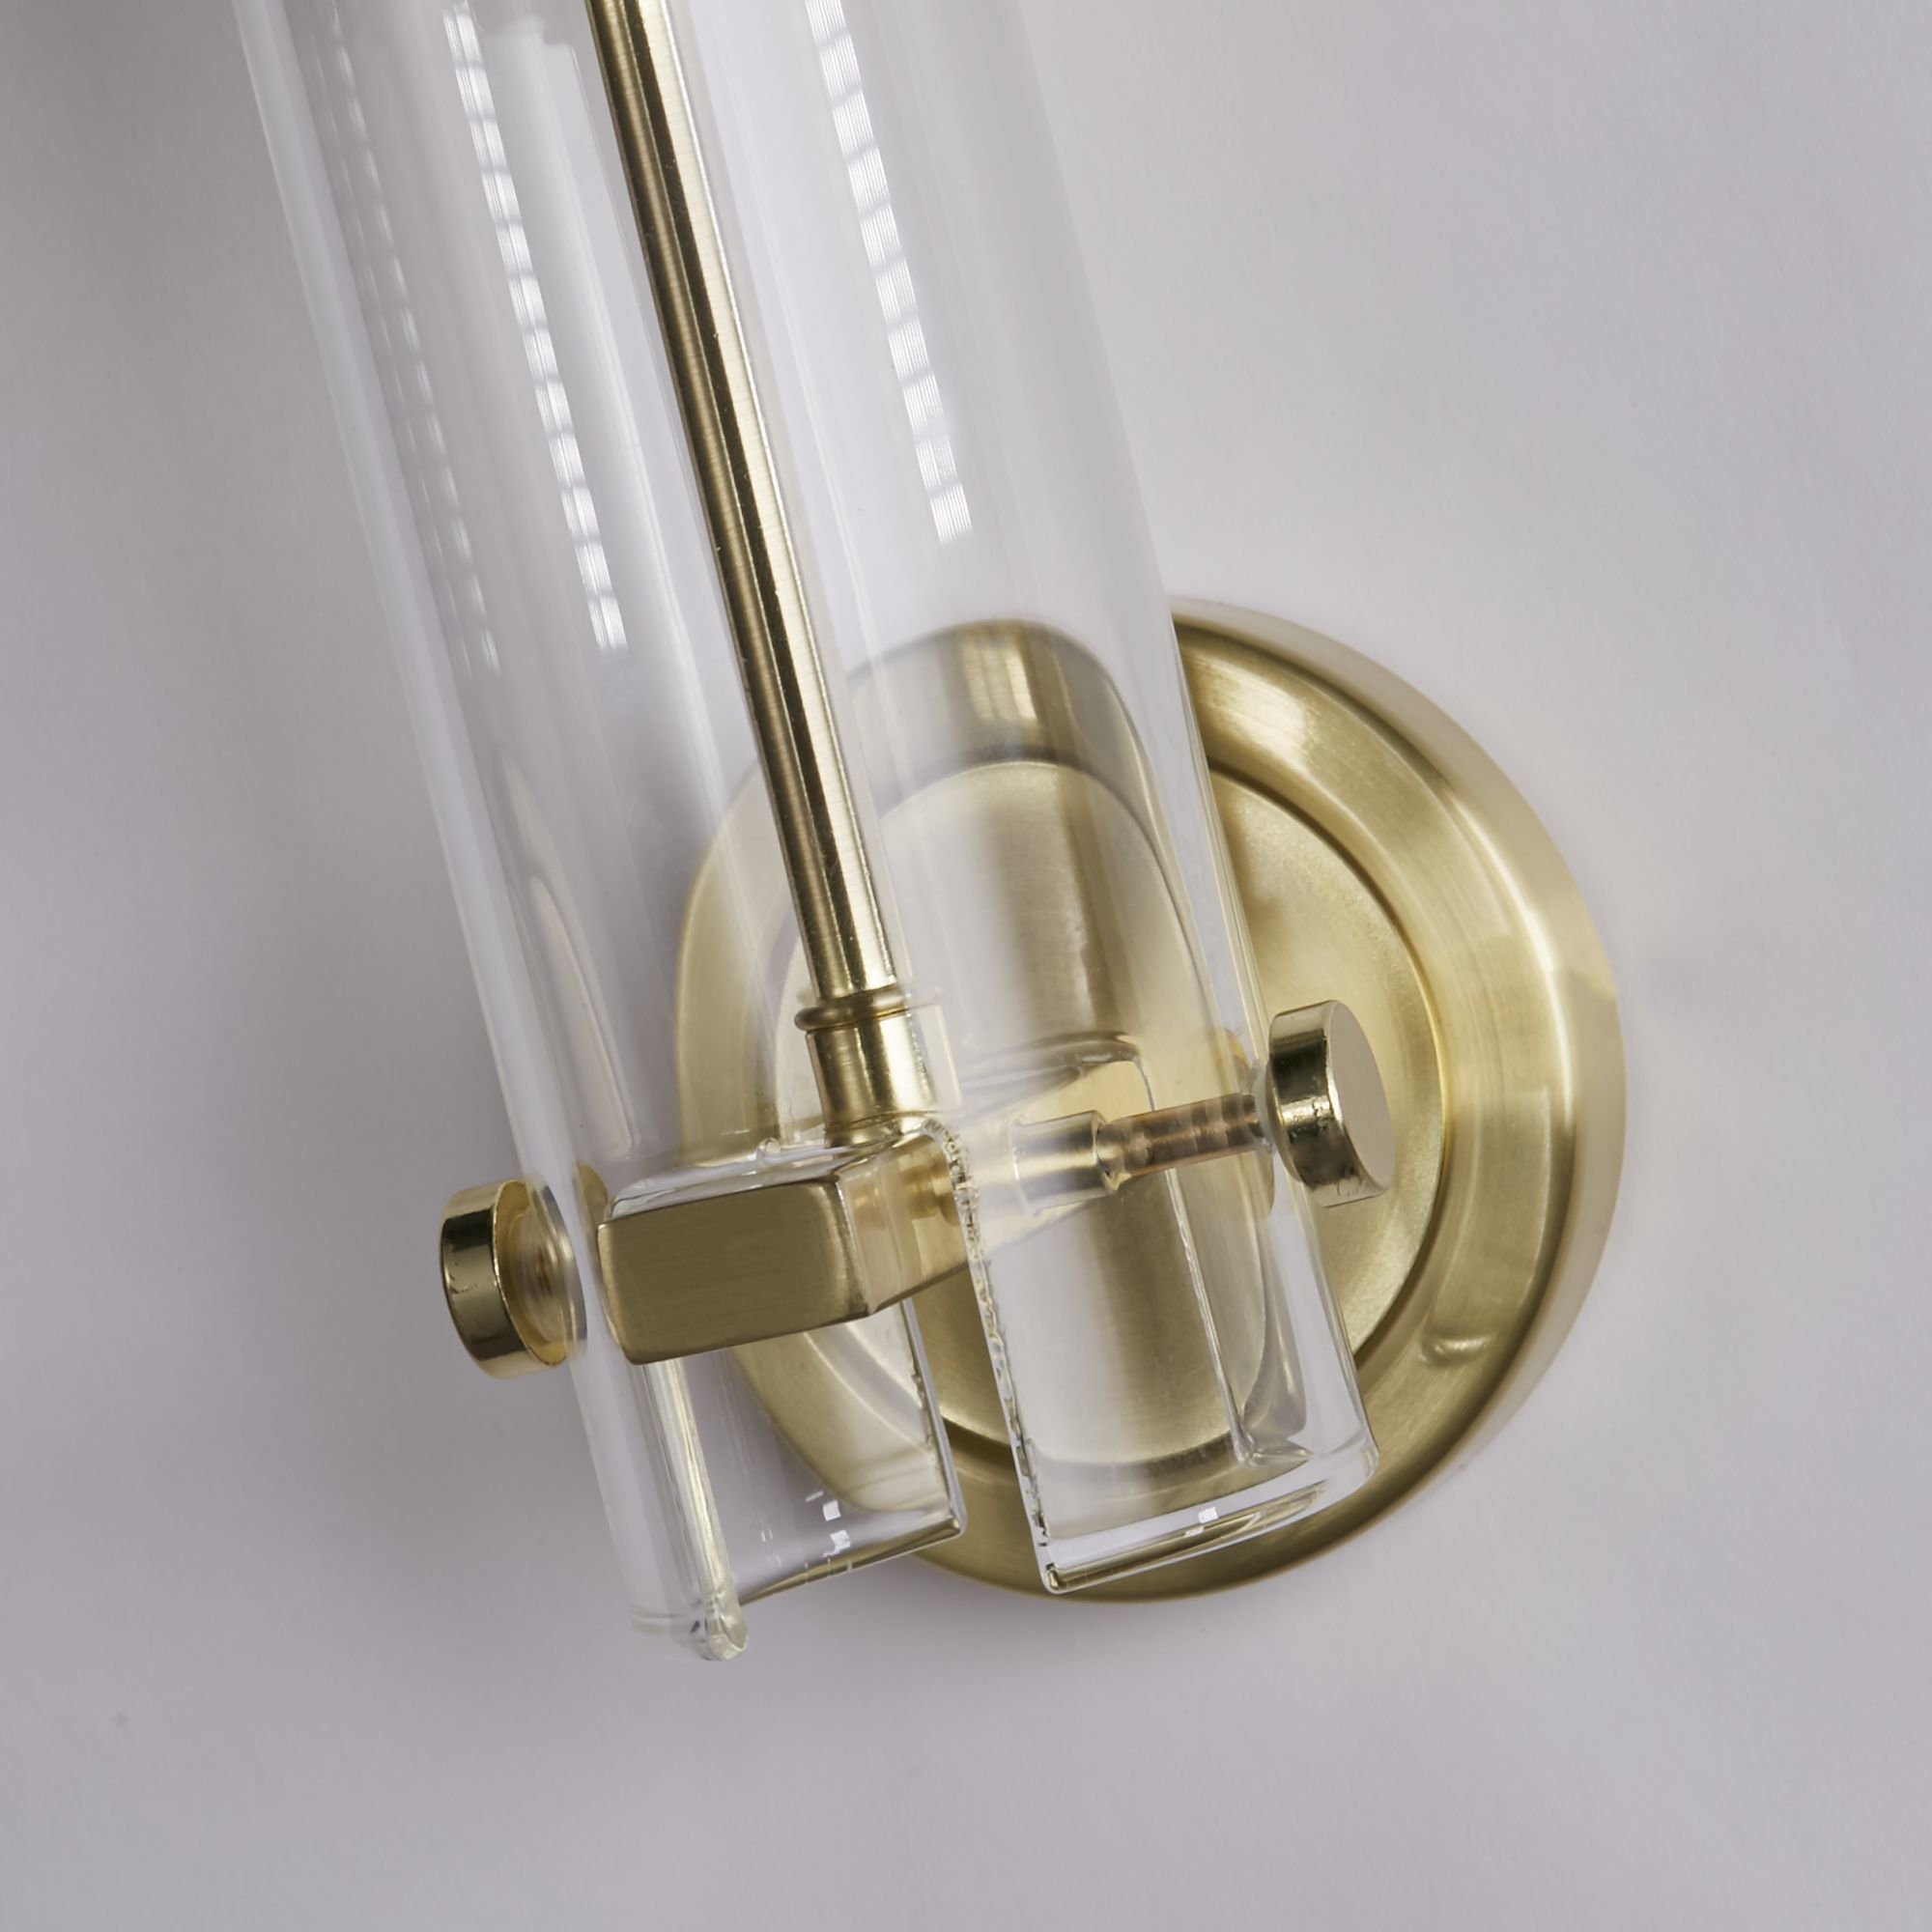 Scope Bathroom Wall Light - Satin Brass & Clear Etched Glass